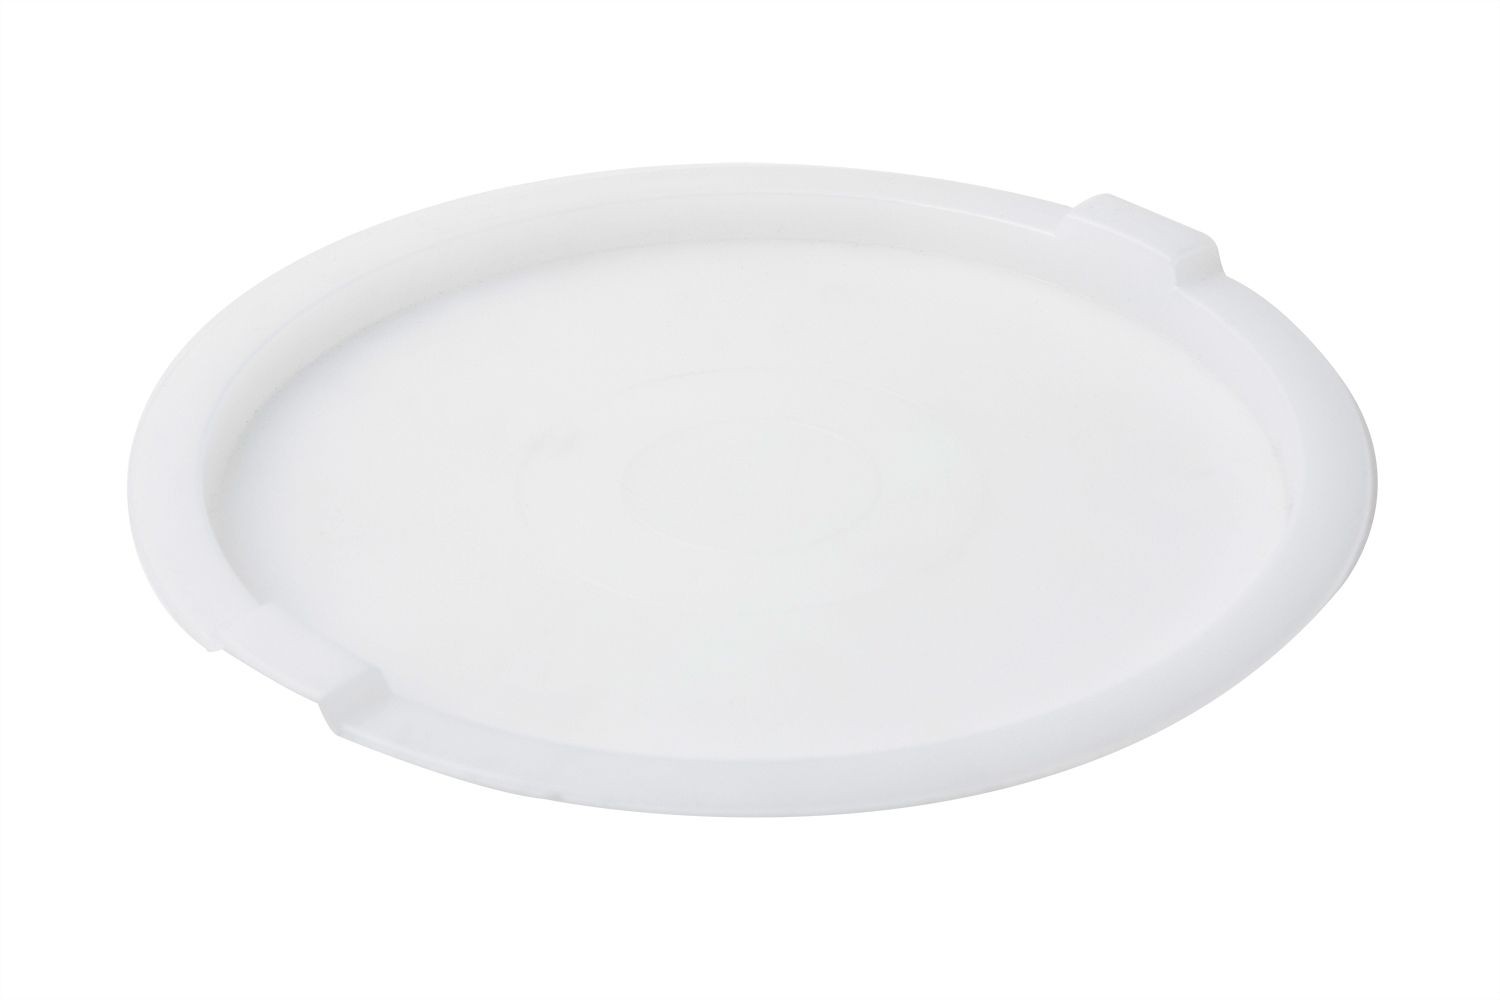 Bon Chef 9317Cover Cover Only for 9317 Cold Wave Triple Wall Bowl